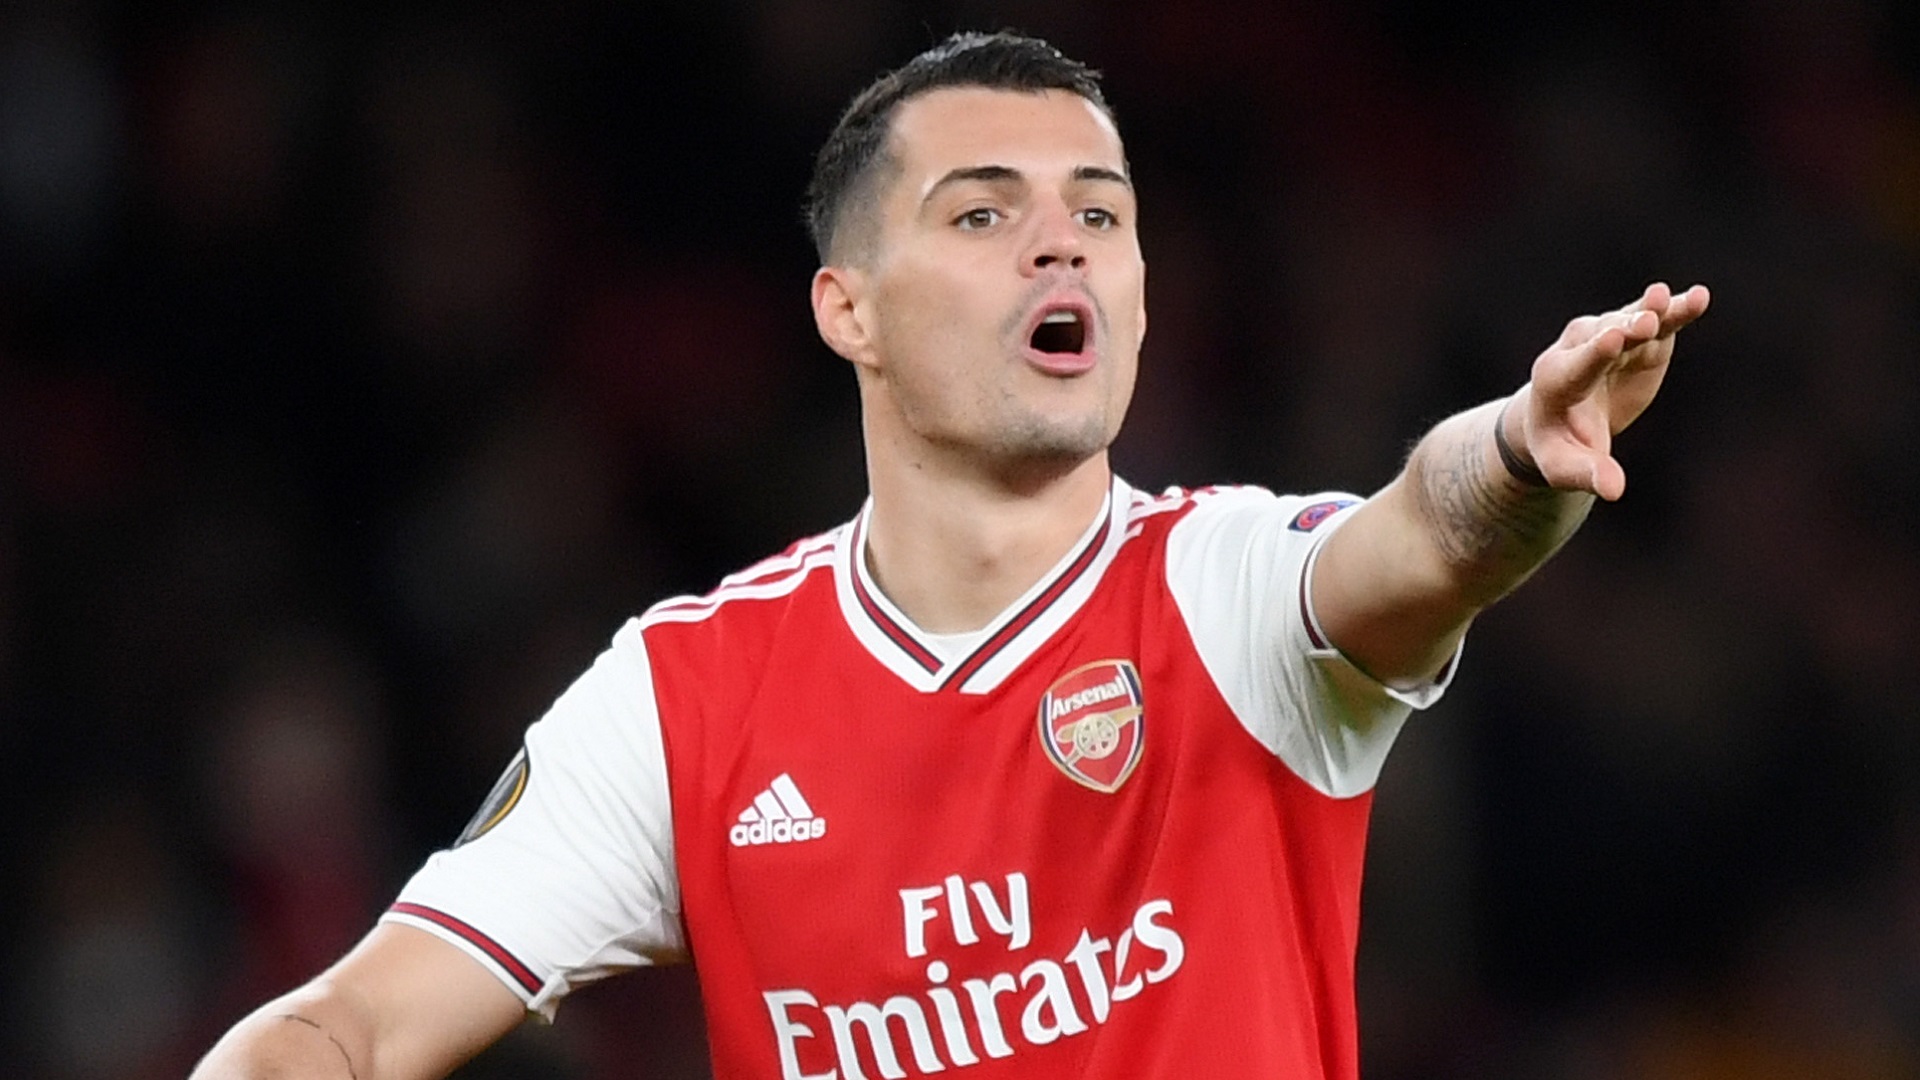 Arsenal's Xhaka has agreement to join Hertha Berlin, confirms agent